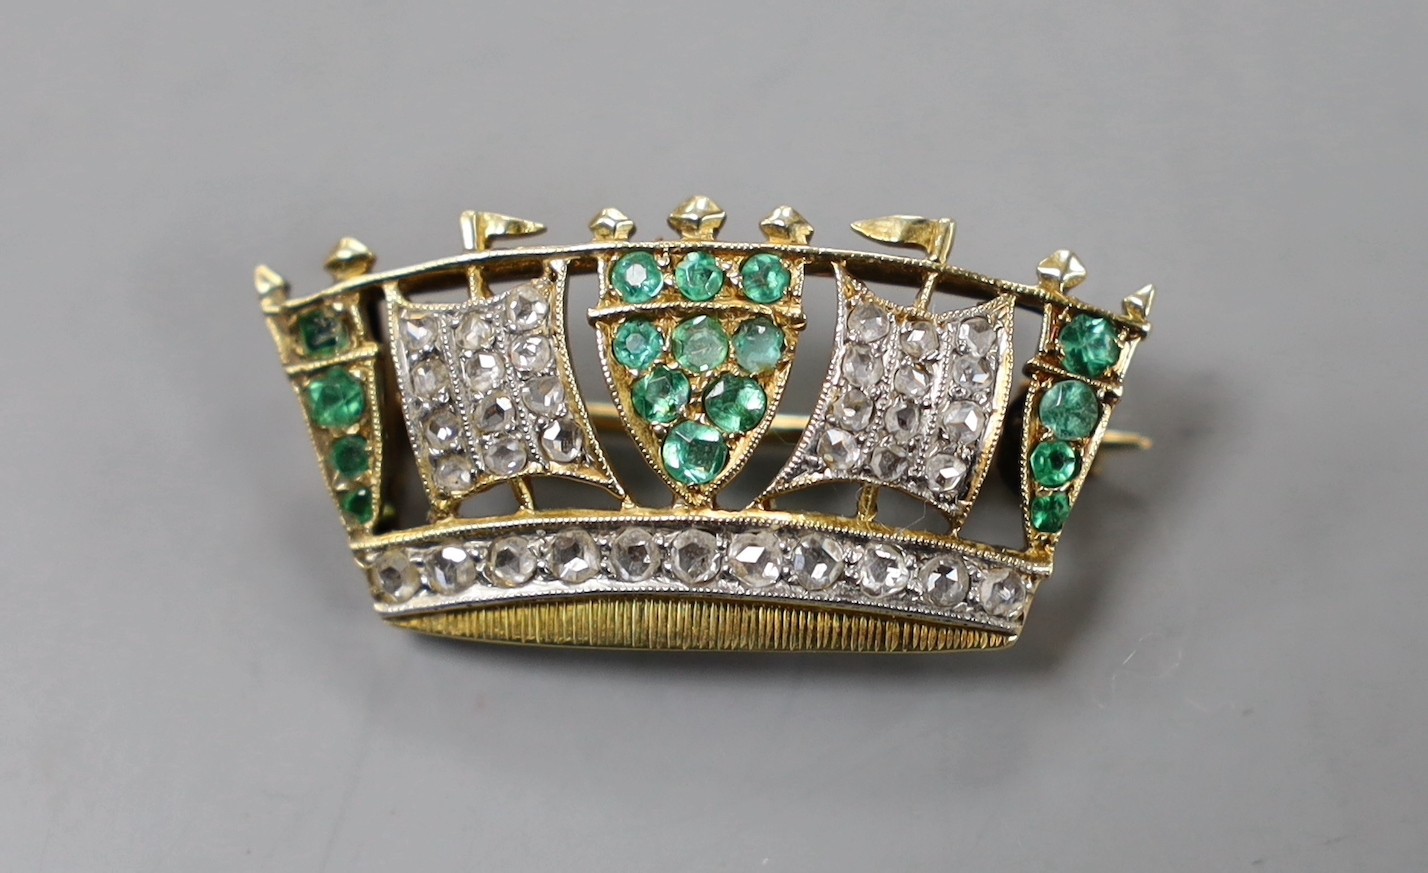 An early 20th century yellow metal, emerald and diamond set coronet brooch, 30mm, gross weight 4.4 grams.